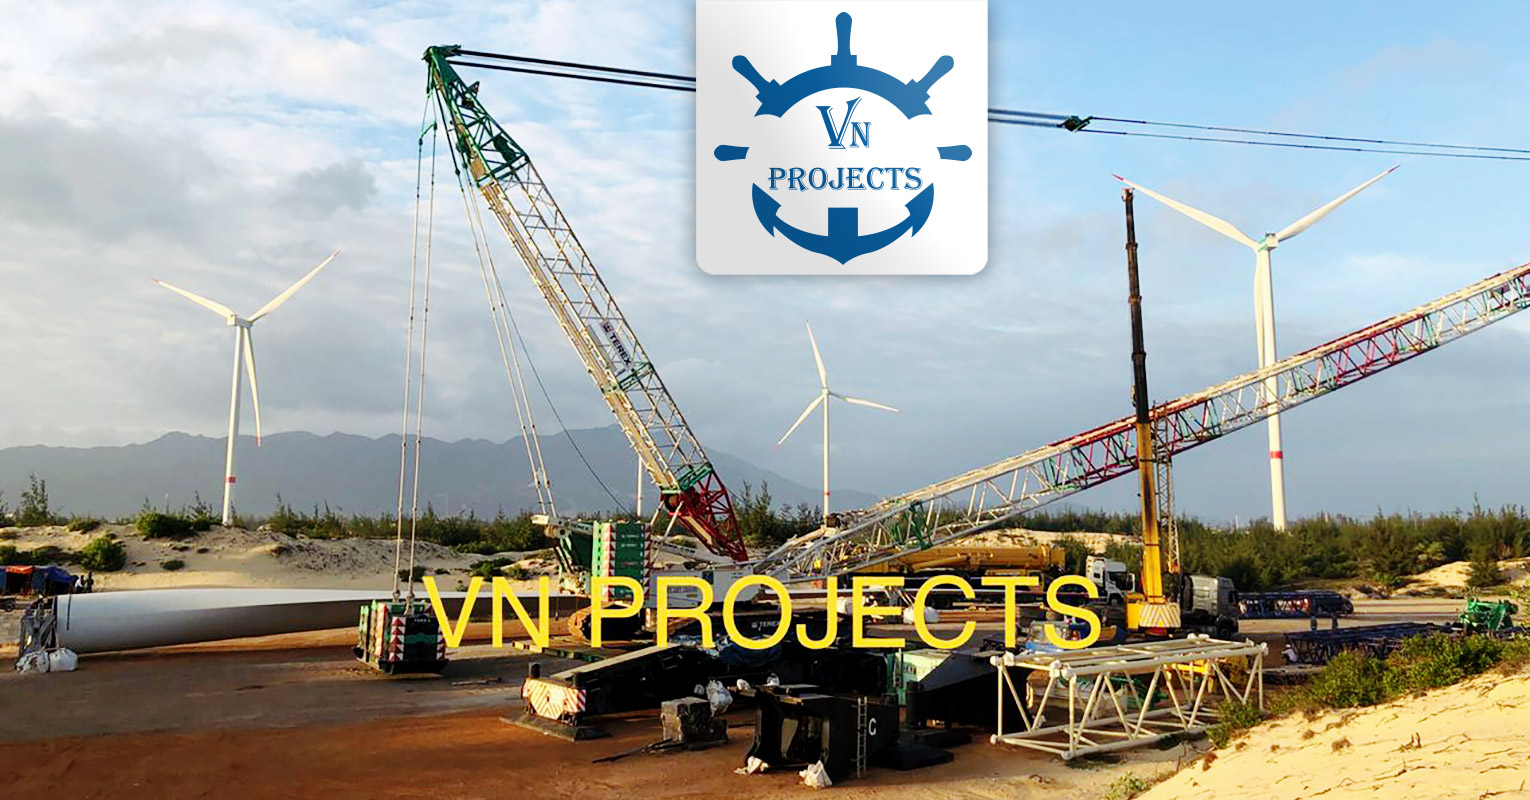 VN Projects has been Offering the Installation of Wind Turbines in the Vietnam Market